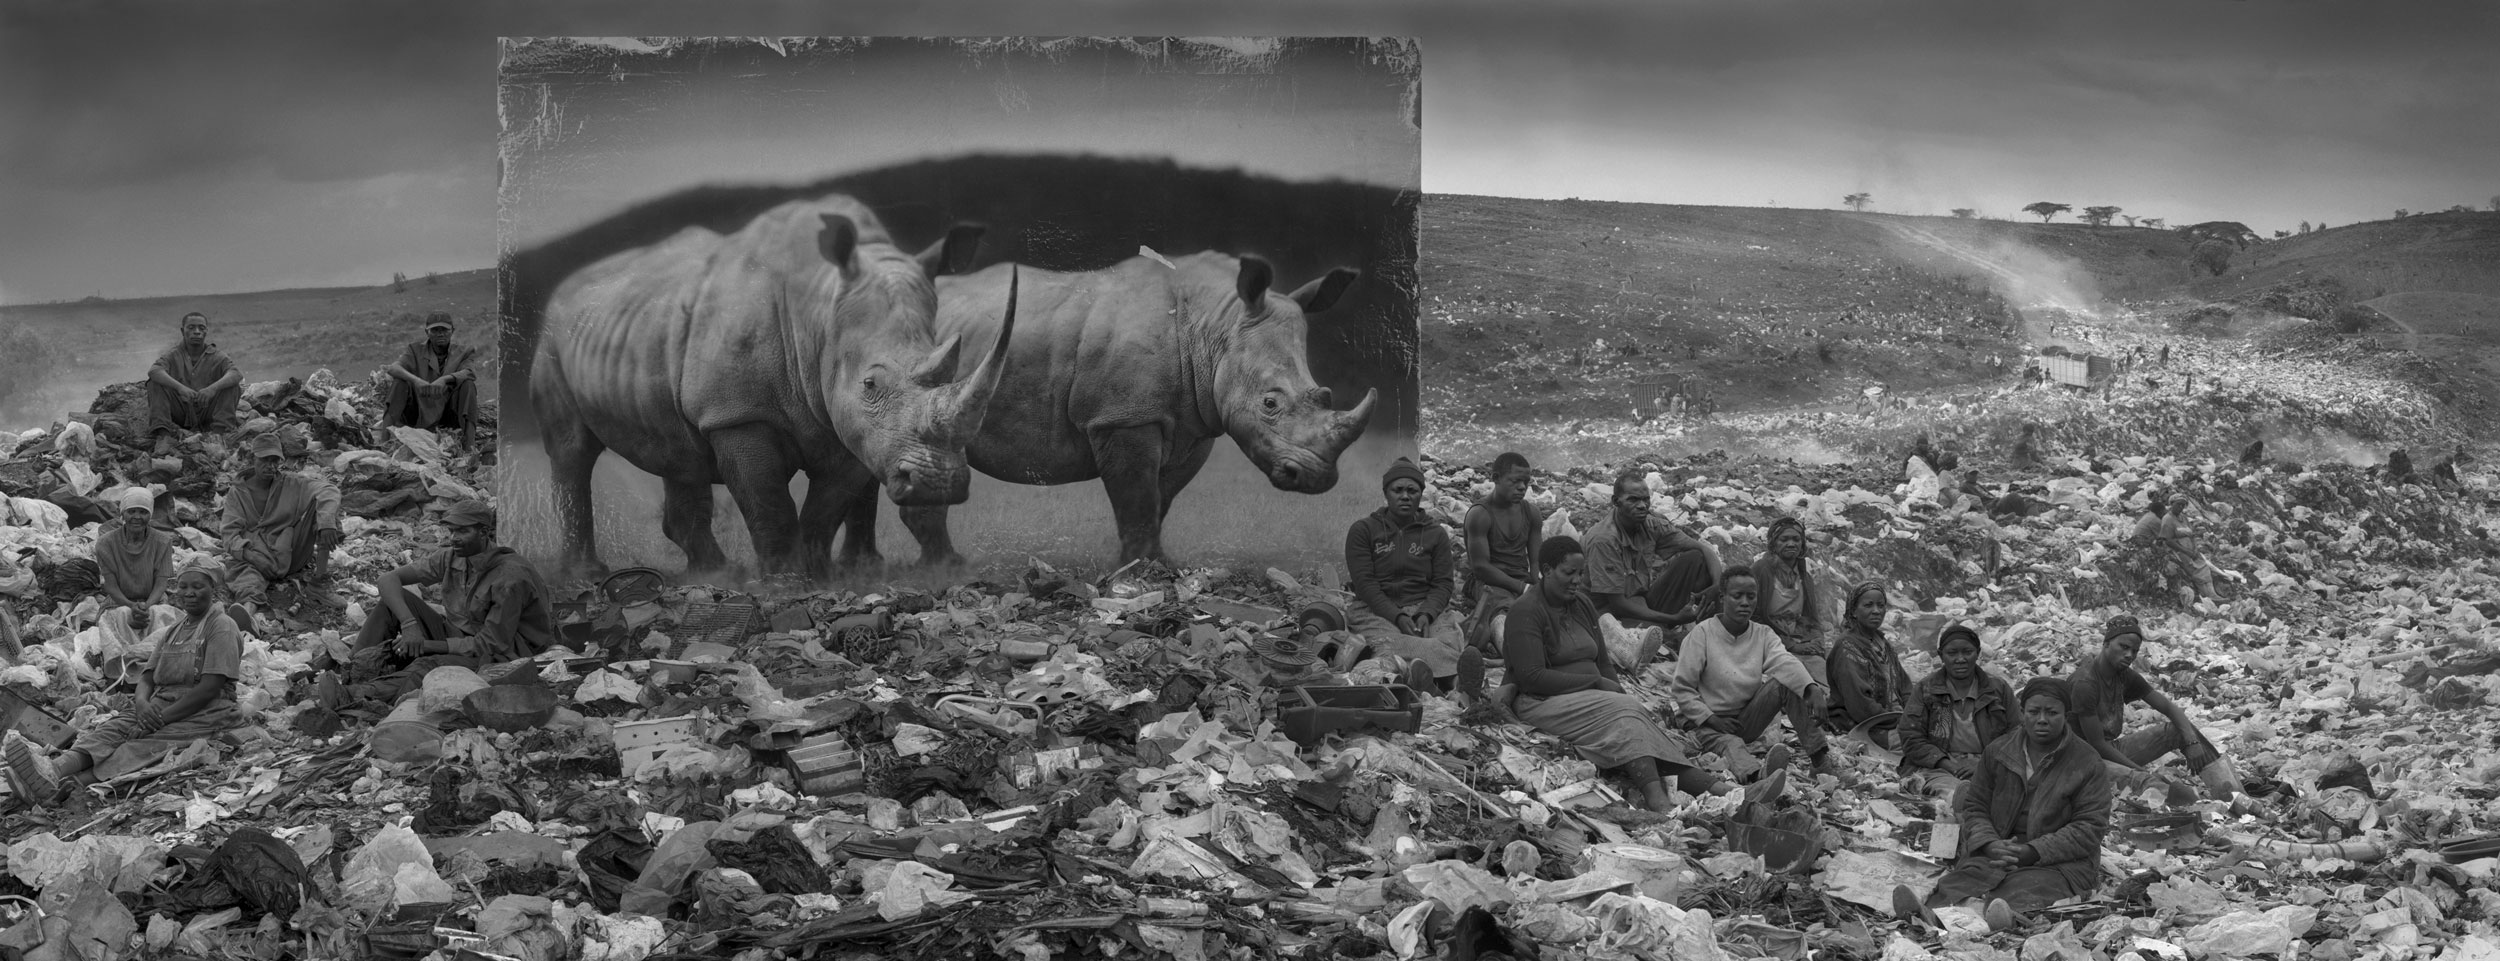 WASTELAND-WITH-RESIDENTS-and-RHINOS